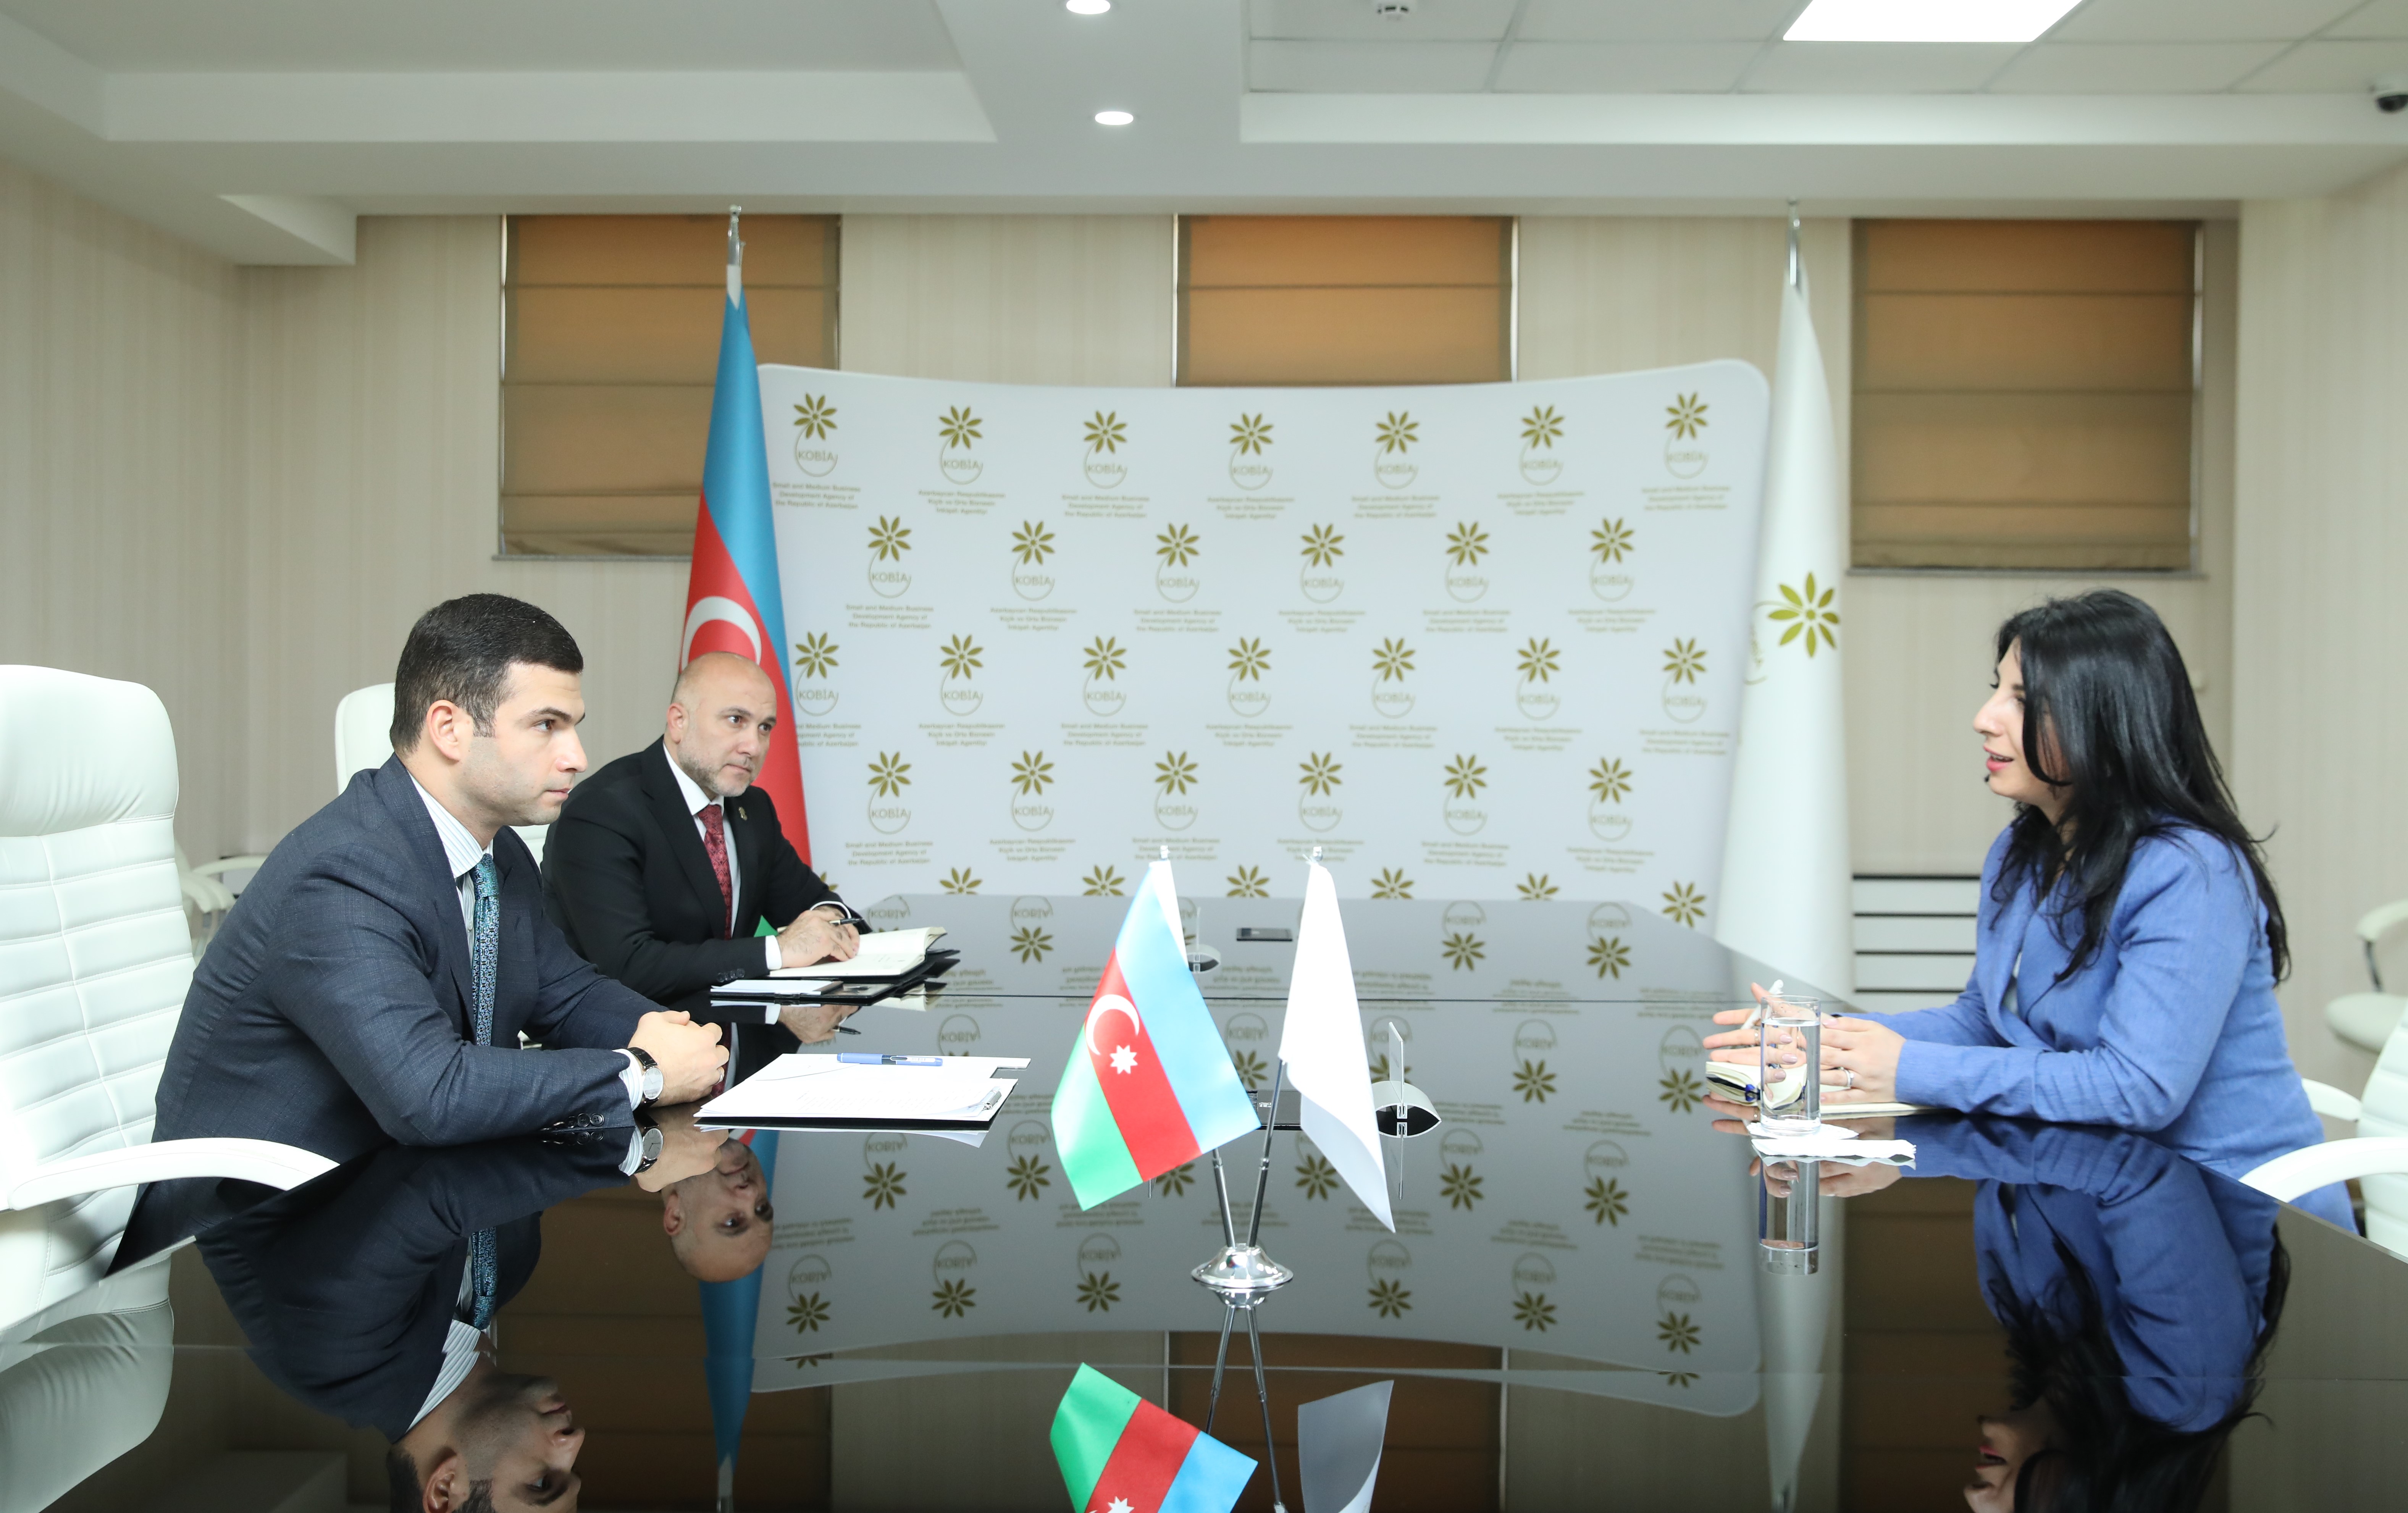 The coordination of local SMEs with foreign partners was discussed 